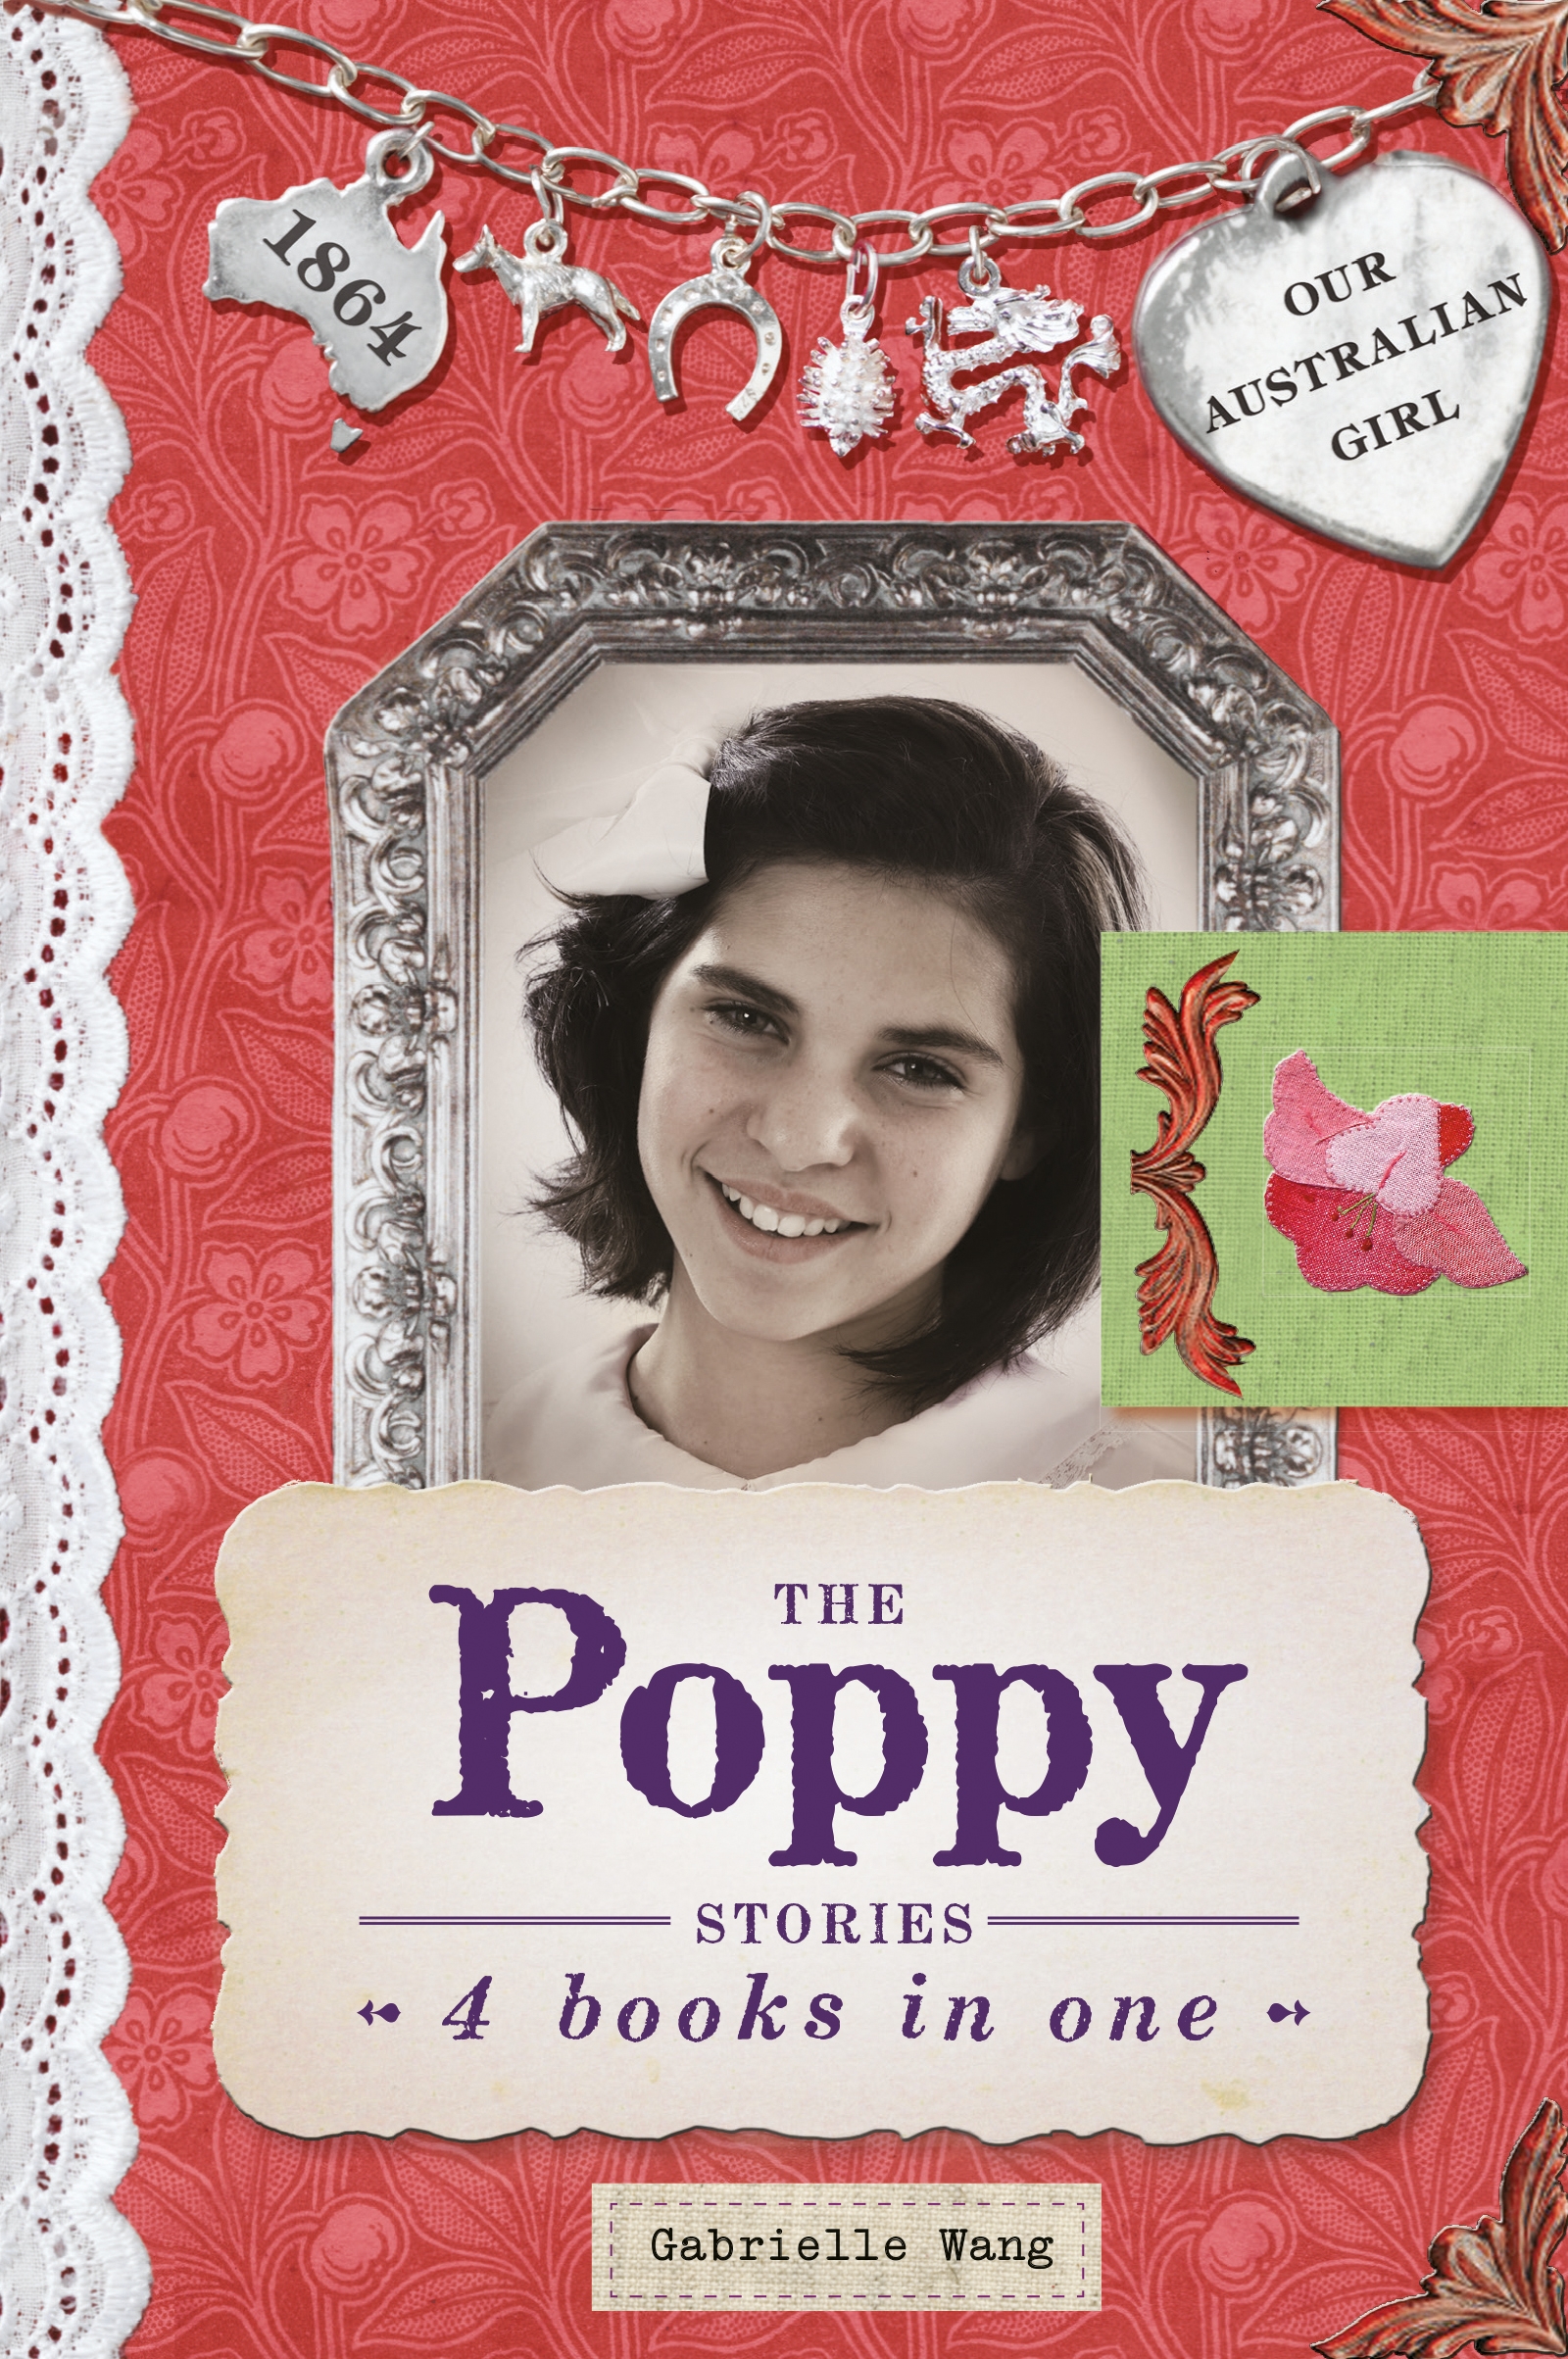 Our Australian Girl The Poppy Stories By Gabrielle Wang Penguin